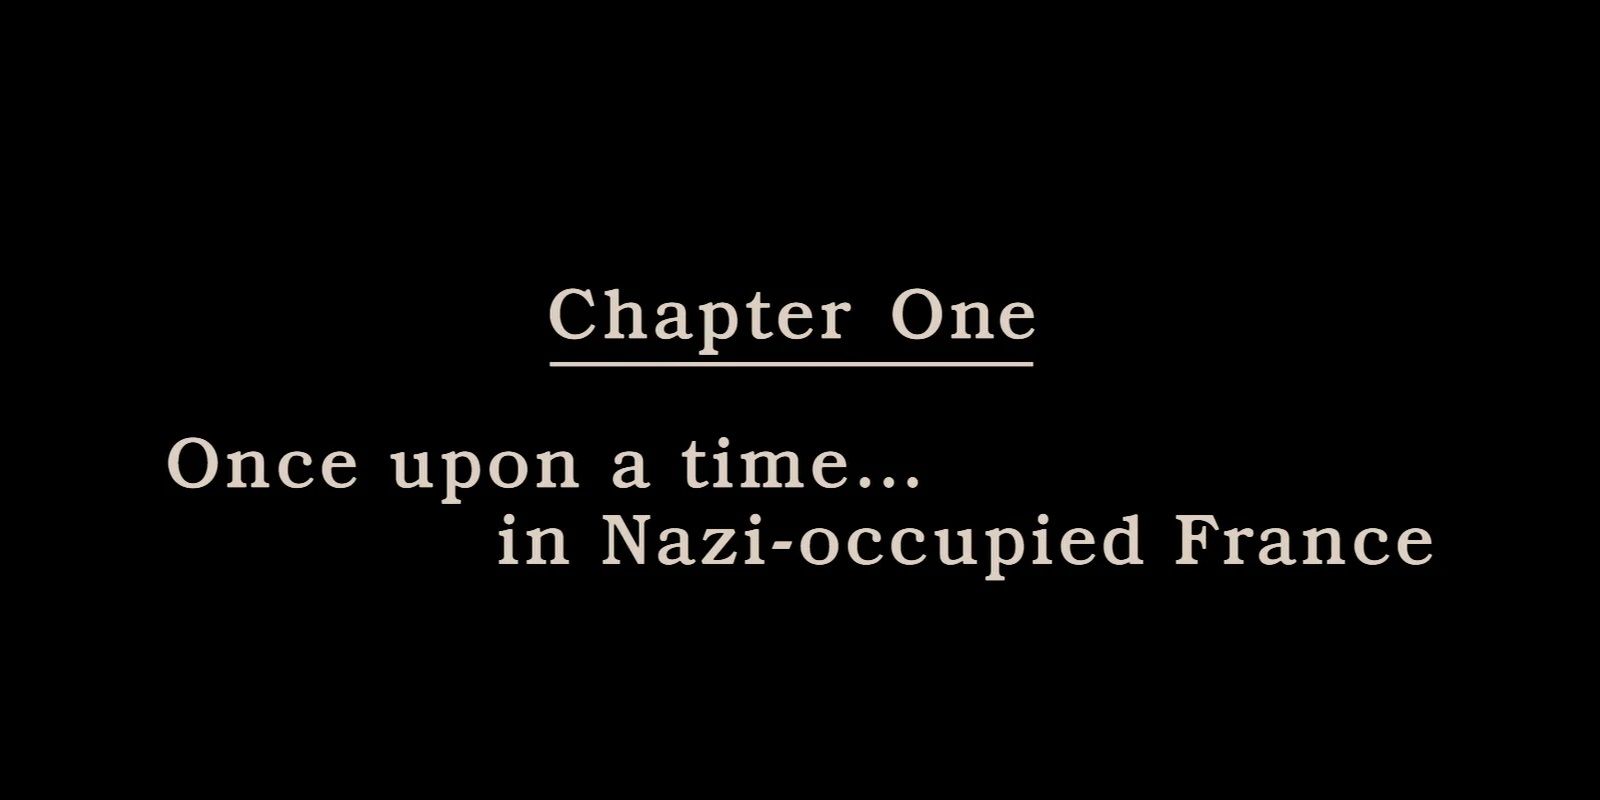 The Chapter 1 title card in Inglourious Basterds